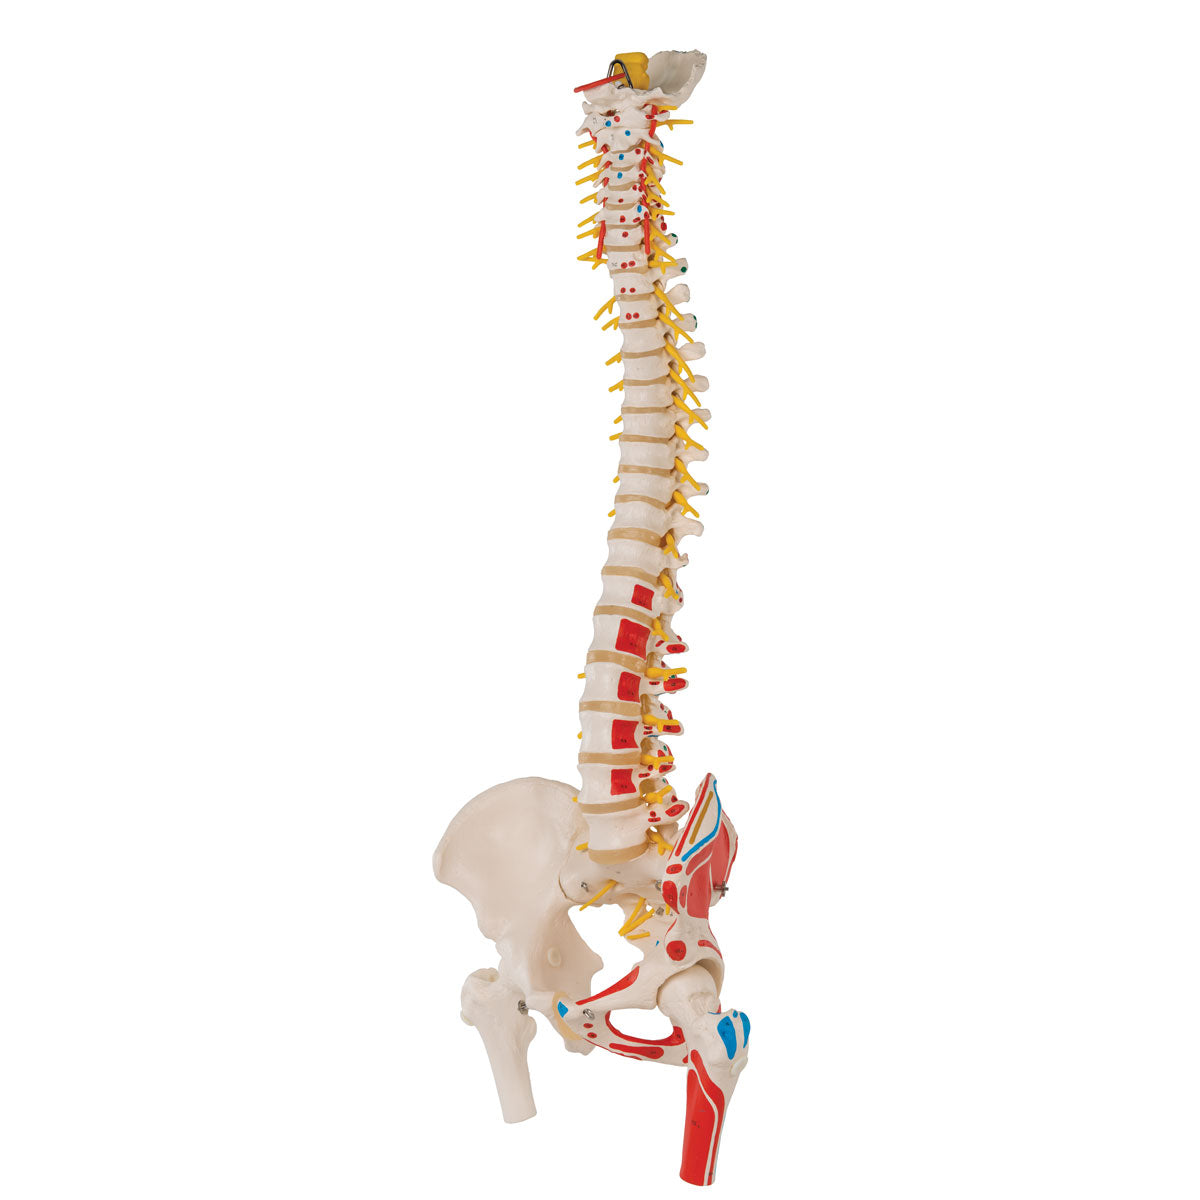 A58/7 Deluxe Flexible Spine Model with Femur Heads, Painted Muscles & Sacral Opening - 3B Smart Anatomy